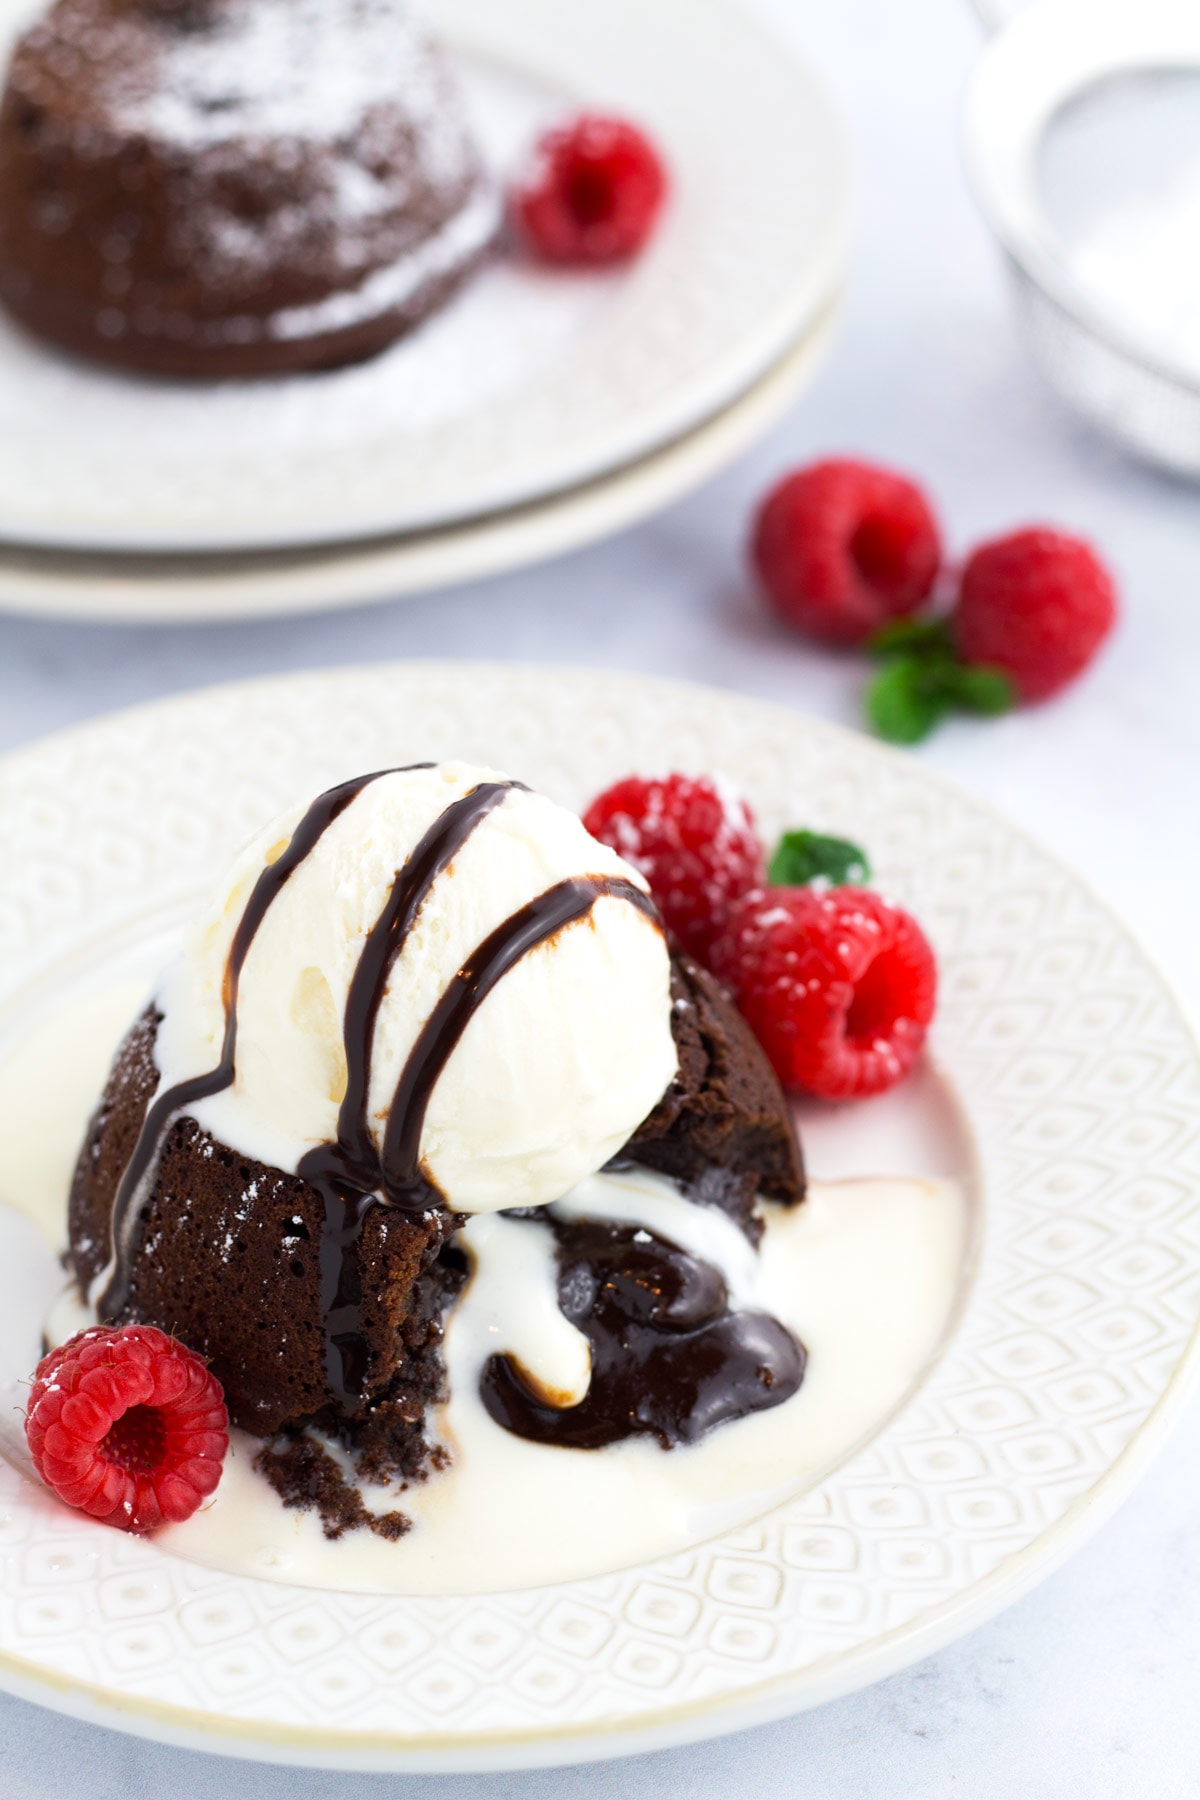 Lava cakes with molten center spilling out and a scoop of ice cream on a plate.